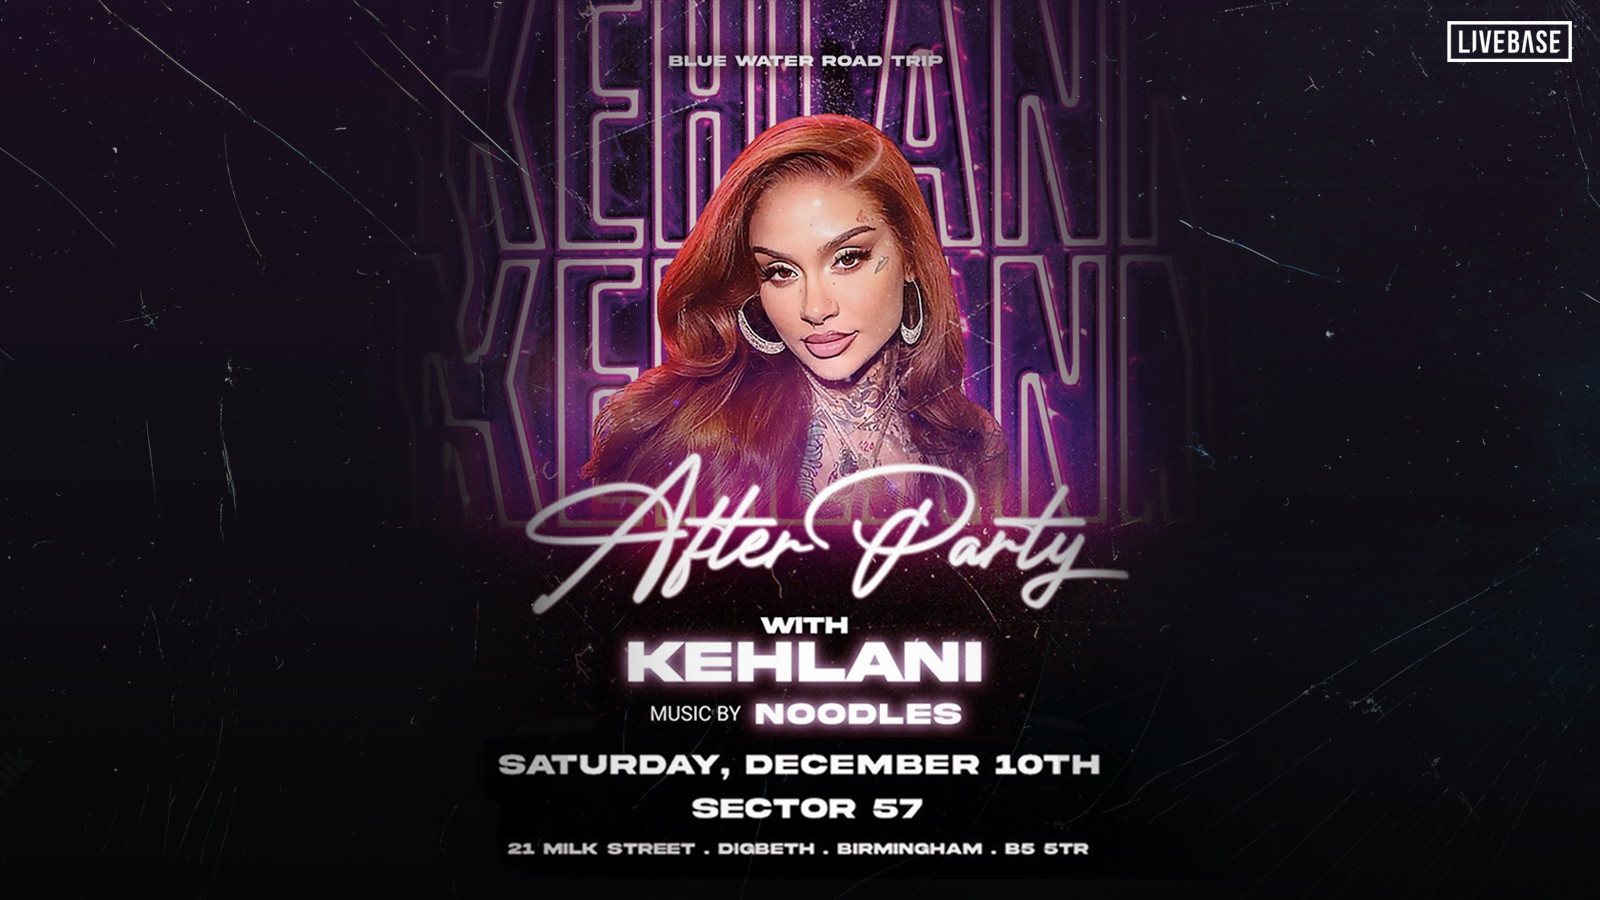 Blue Water Road Tour Official After Party - Hosted by Kehlani at